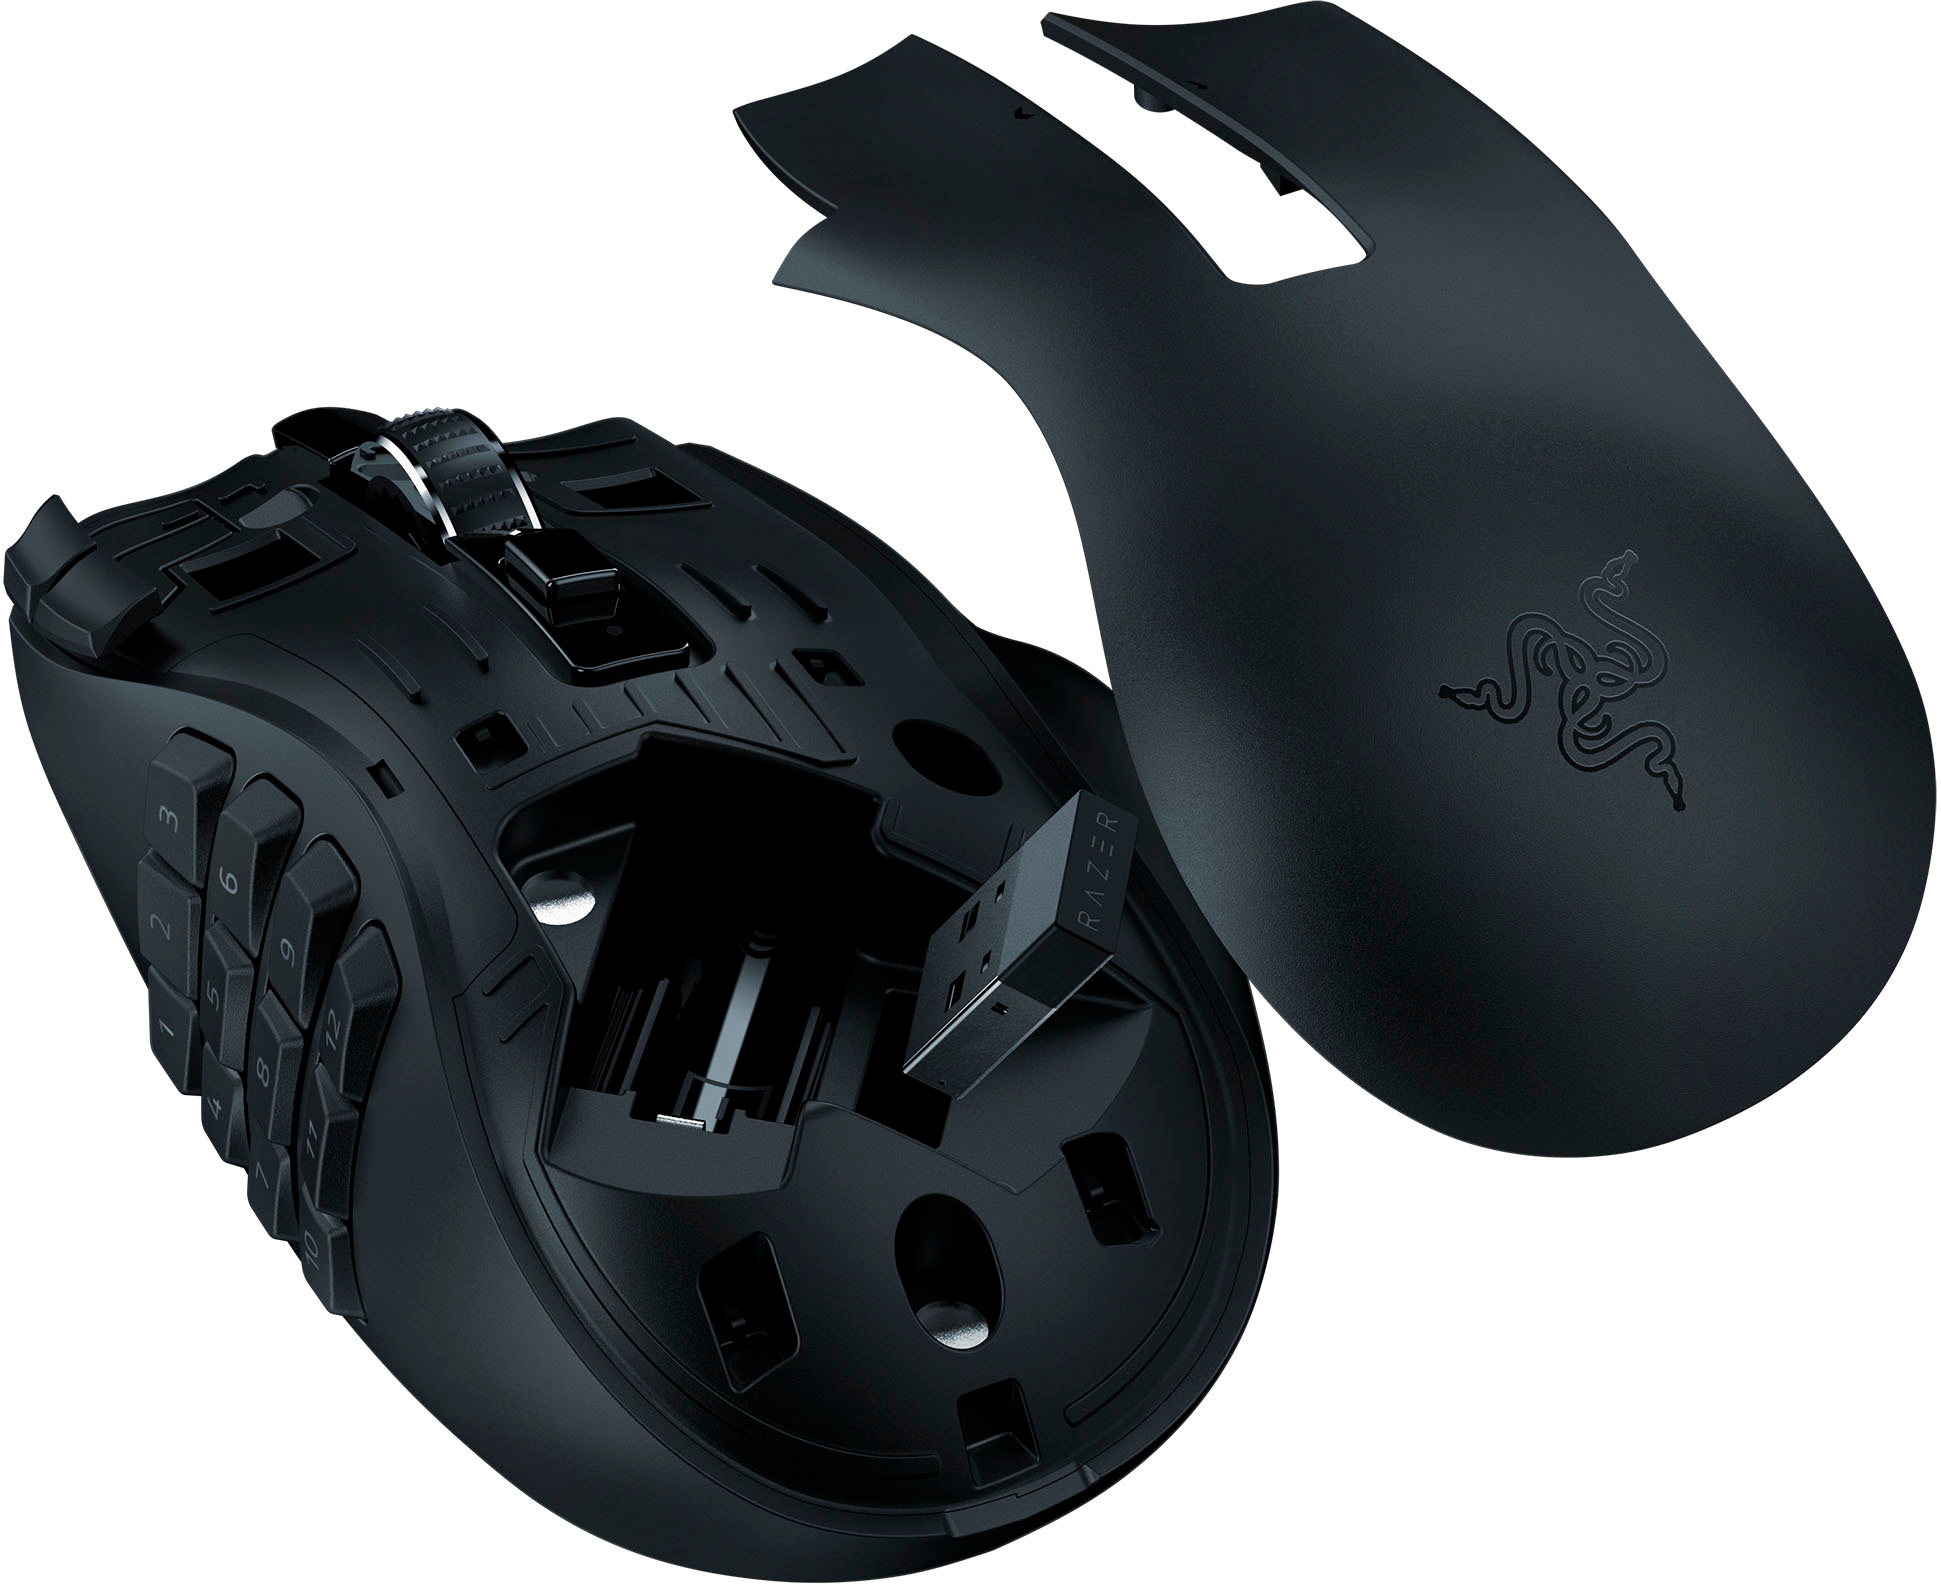 Razer - Naga V2 Hyperspeed MMO Wireless Optical Gaming Mouse with 19 Programmable Buttons - Black